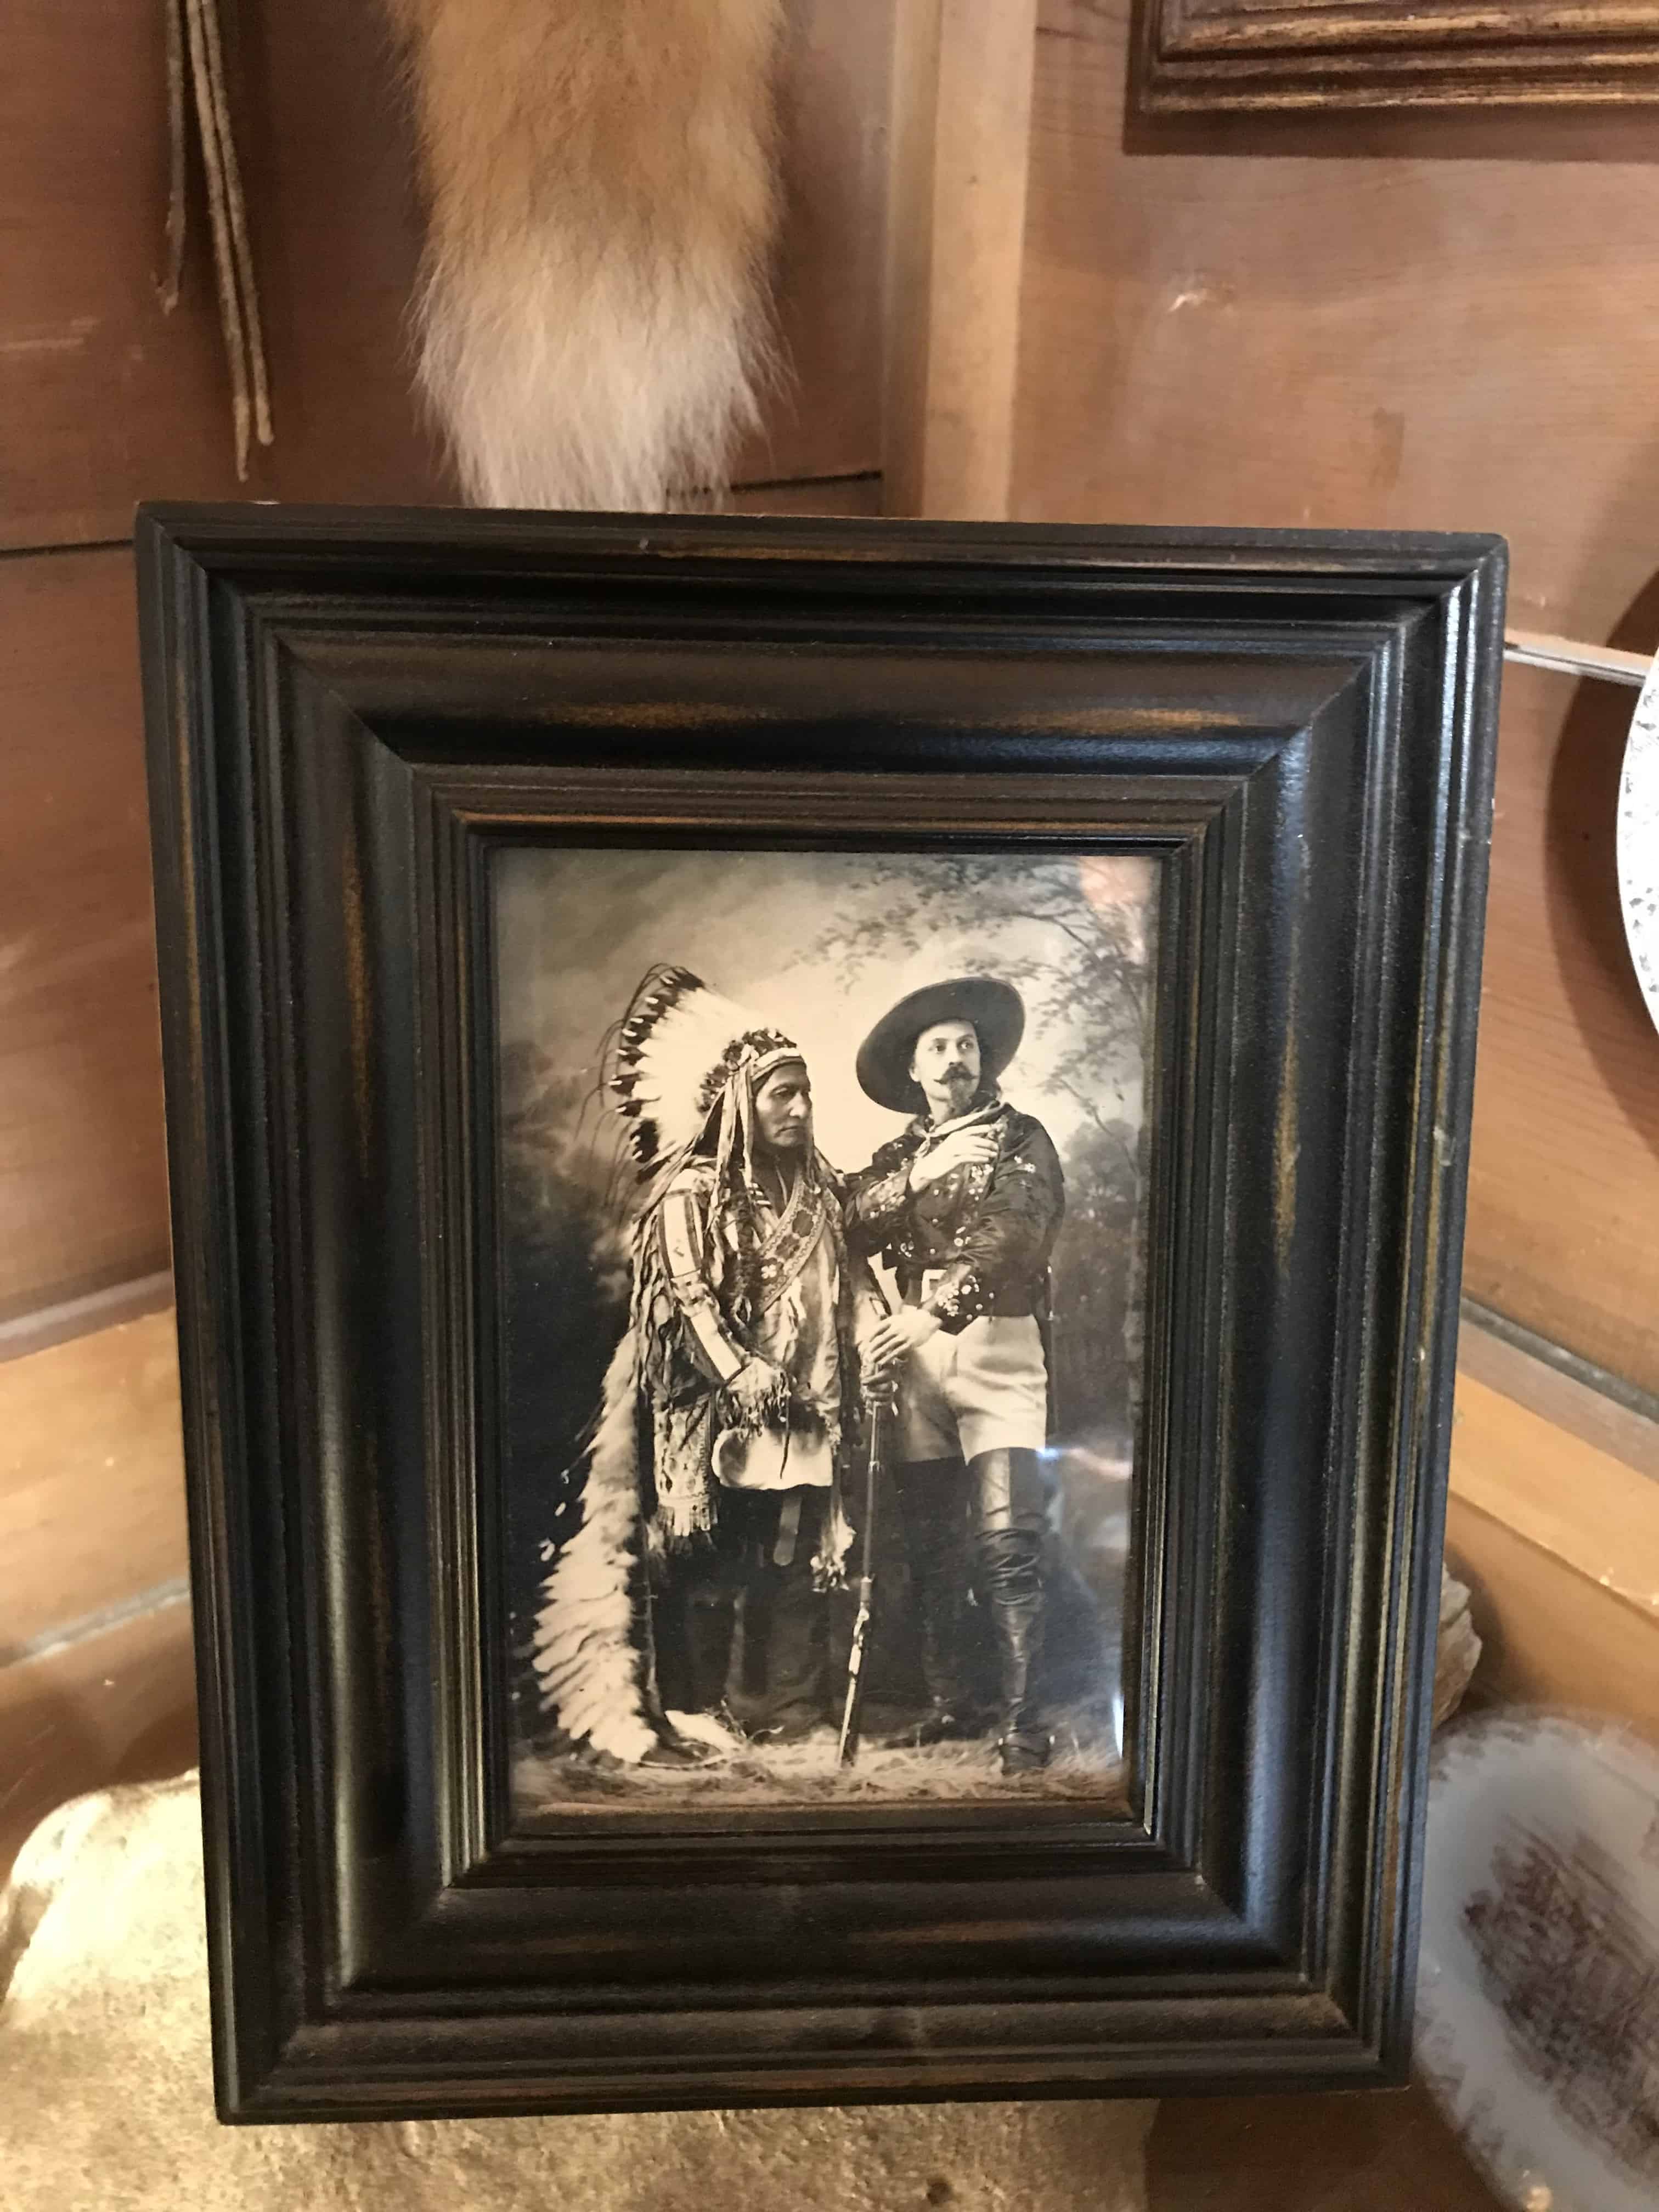 Black and white framed photo of cowboy with indigenous chief. Property of the Sod House Museum.